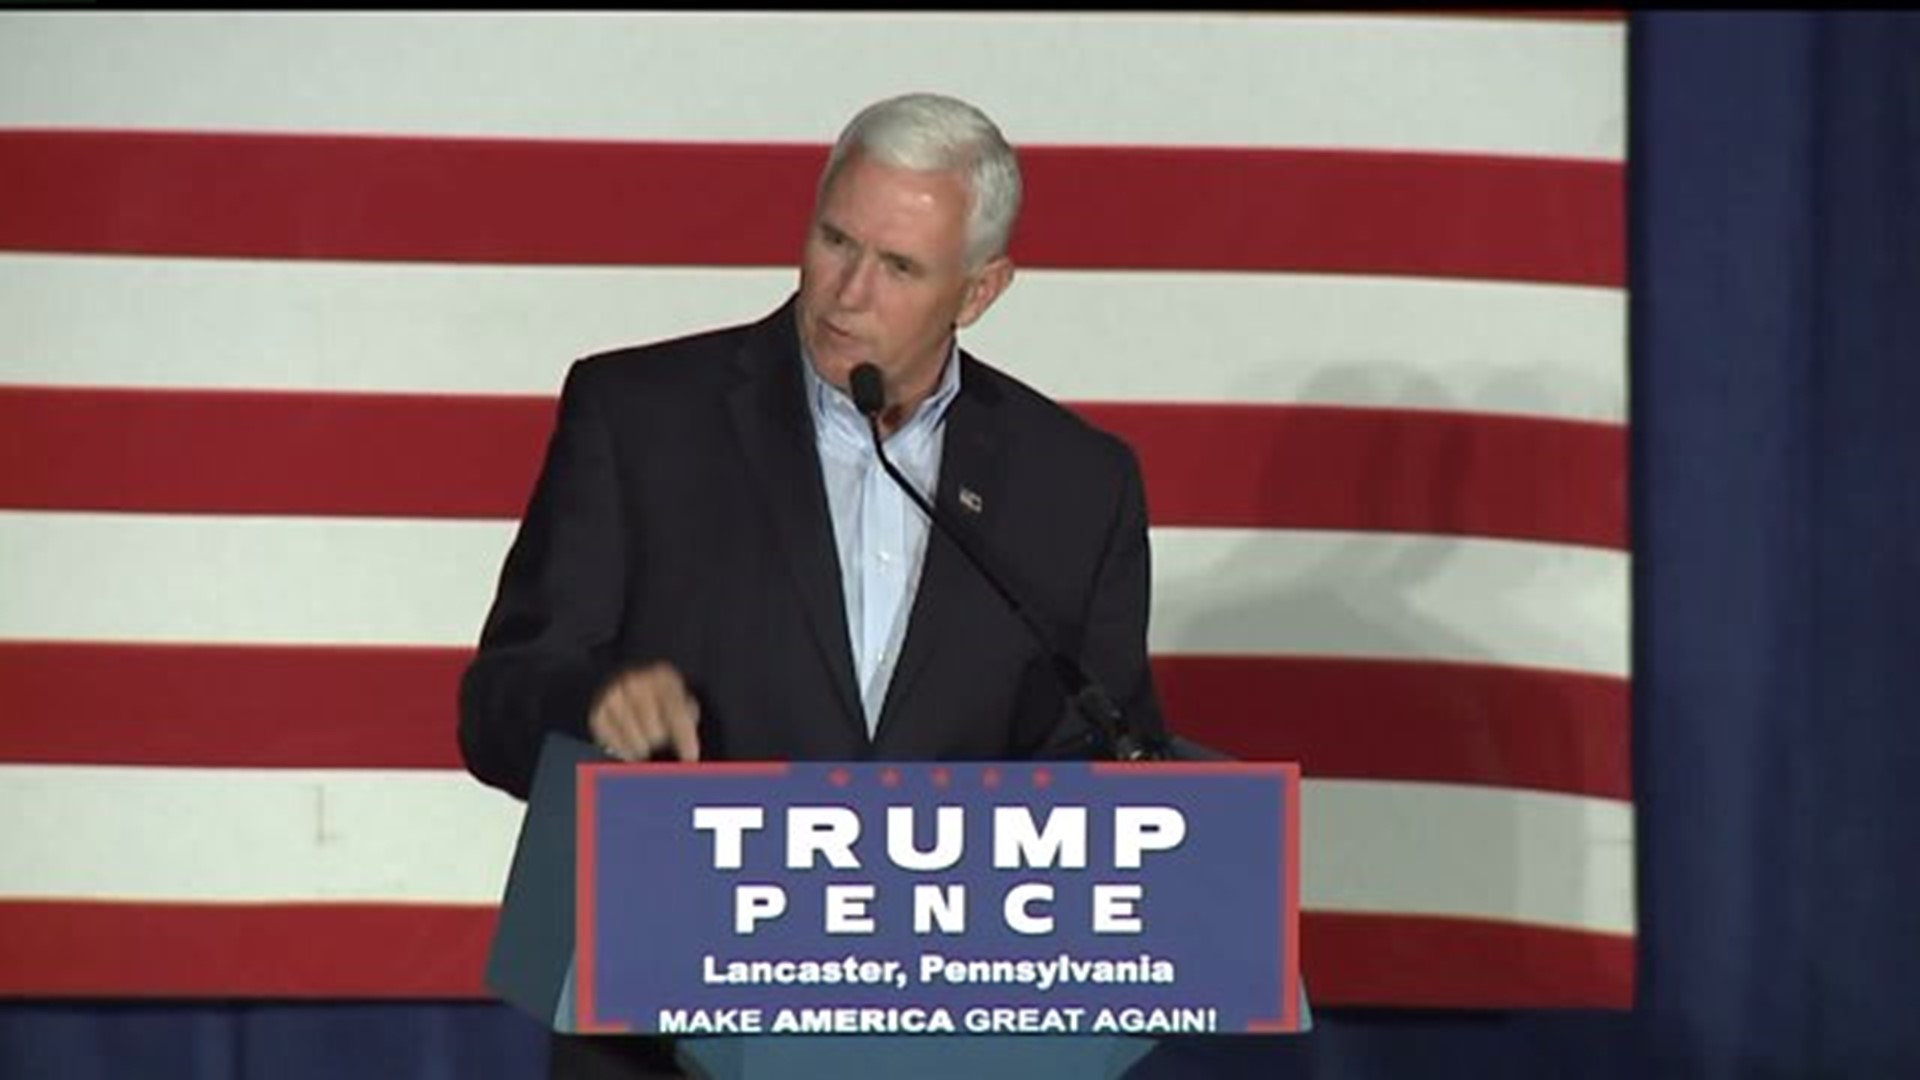 Gov. Mike Pence campaigns in Lancaster Co. for Trump